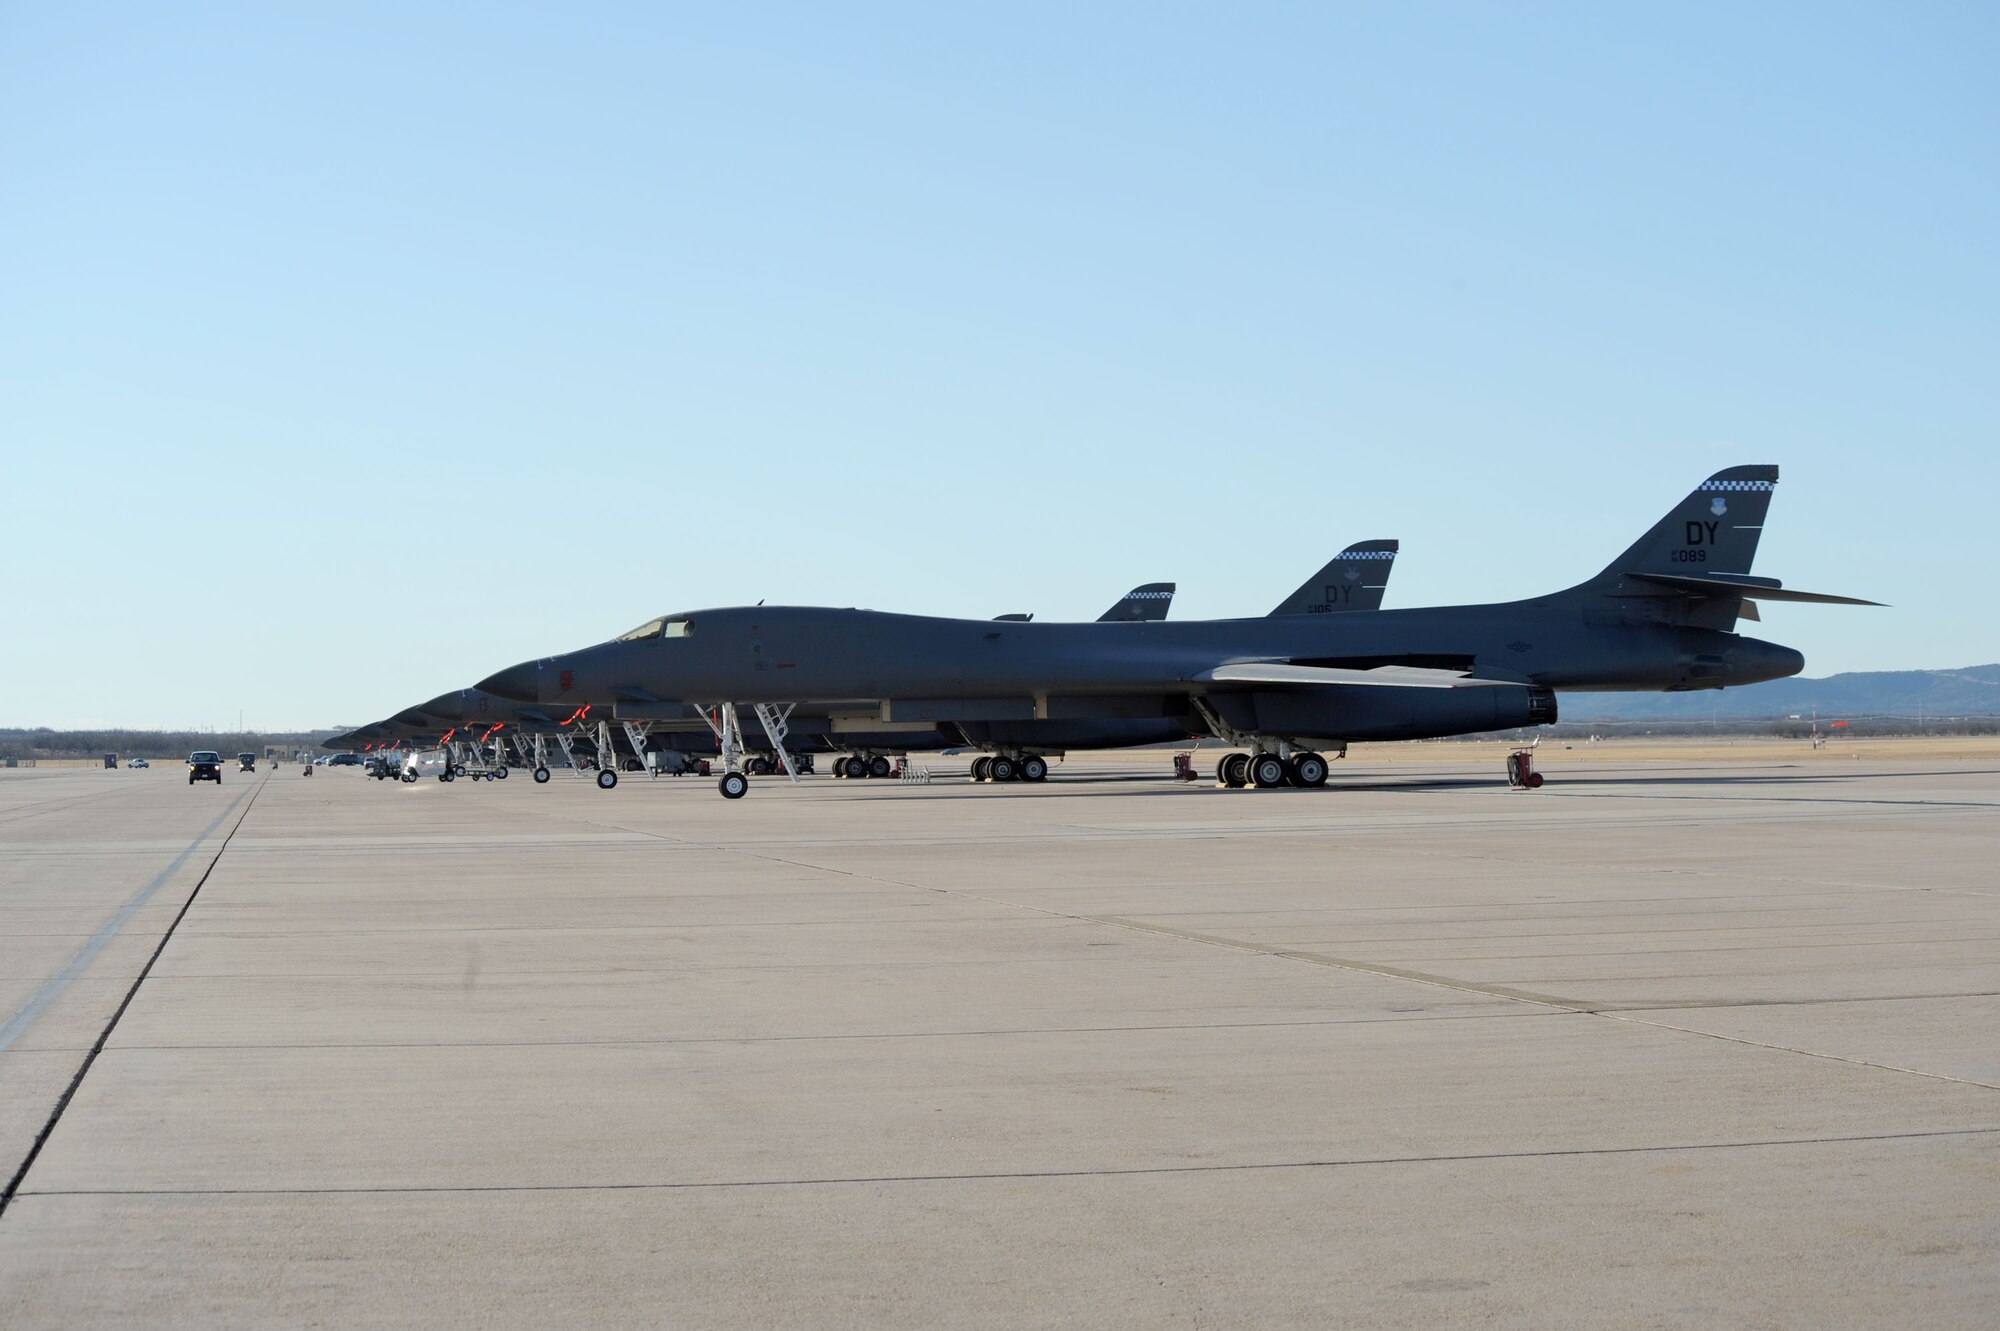 DYESS AIR FORCE BASE, Texas -- B-1B Lancers sit lined up on the flight line during the operational readiness inspection (ORI) here, Jan. 6.  The ORI test the 7th Bomb Wing ability to deploy and complete the mission successfully.  (U.S. Air Force photo by Staff Sgt. Darcie Ibidapo)